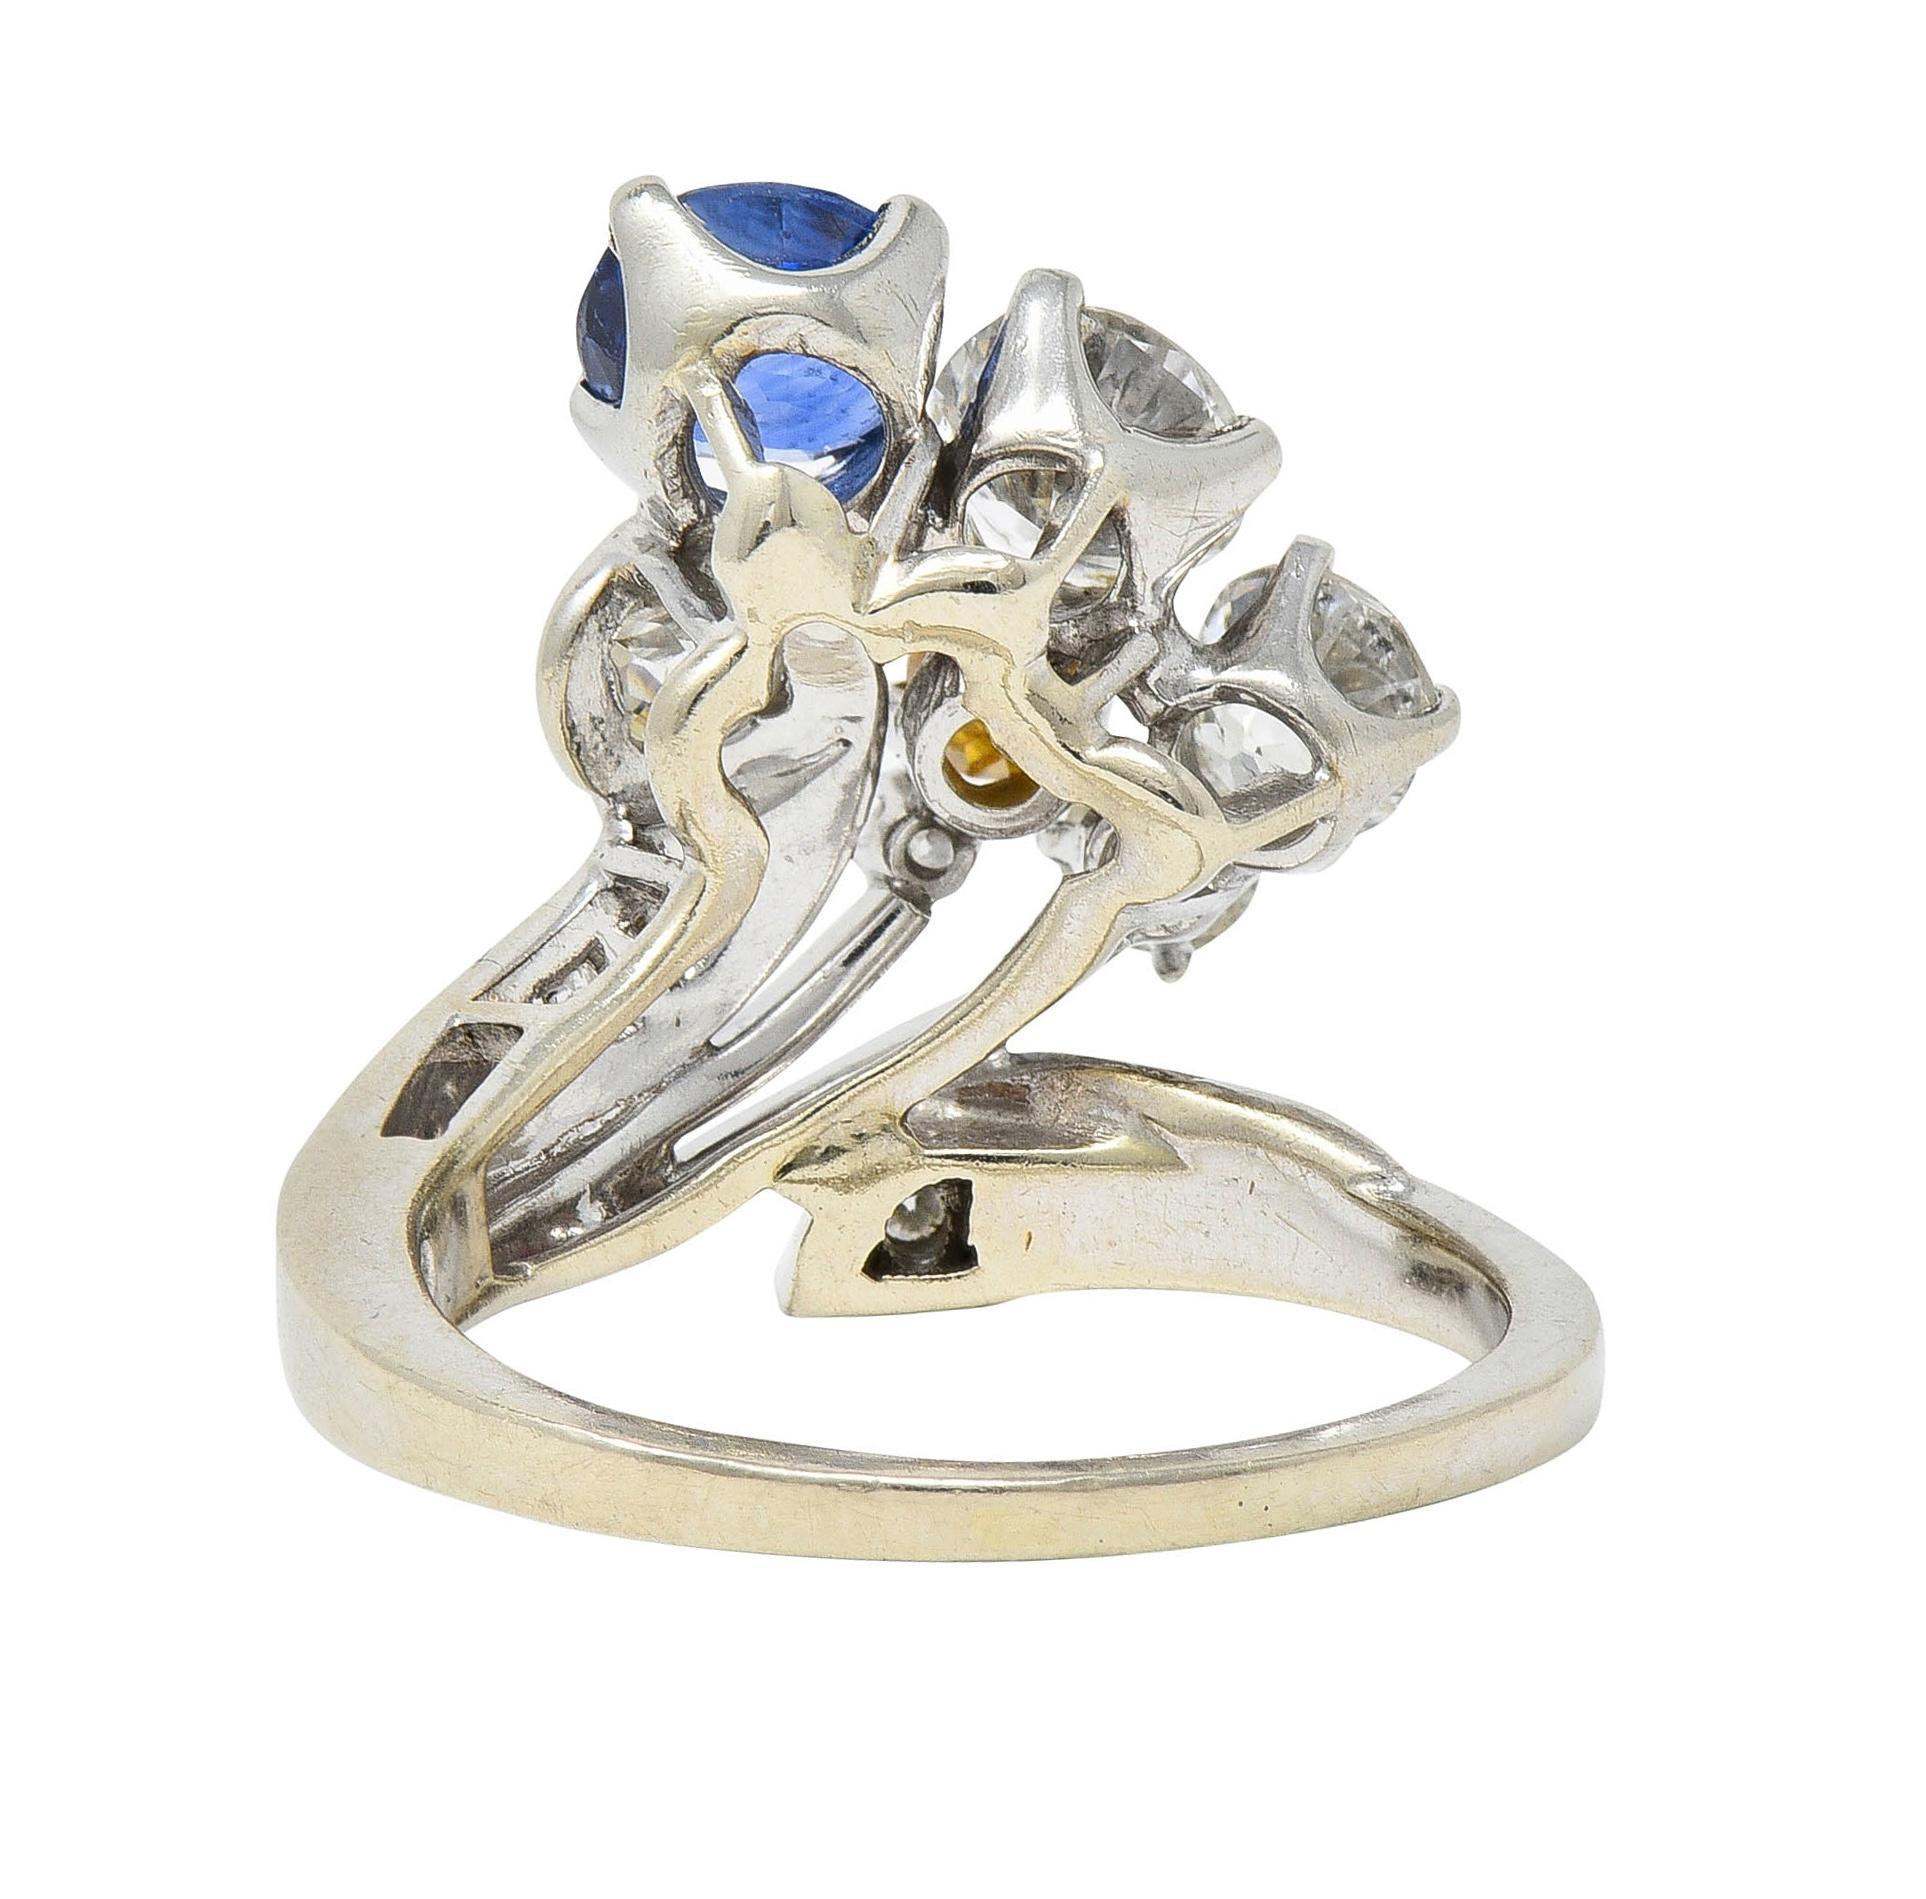 Erwin Reu Co. Mid-Century 2.03 CTW Sapphire Diamond 14 Karat Gold Bypass Ring In Excellent Condition For Sale In Philadelphia, PA